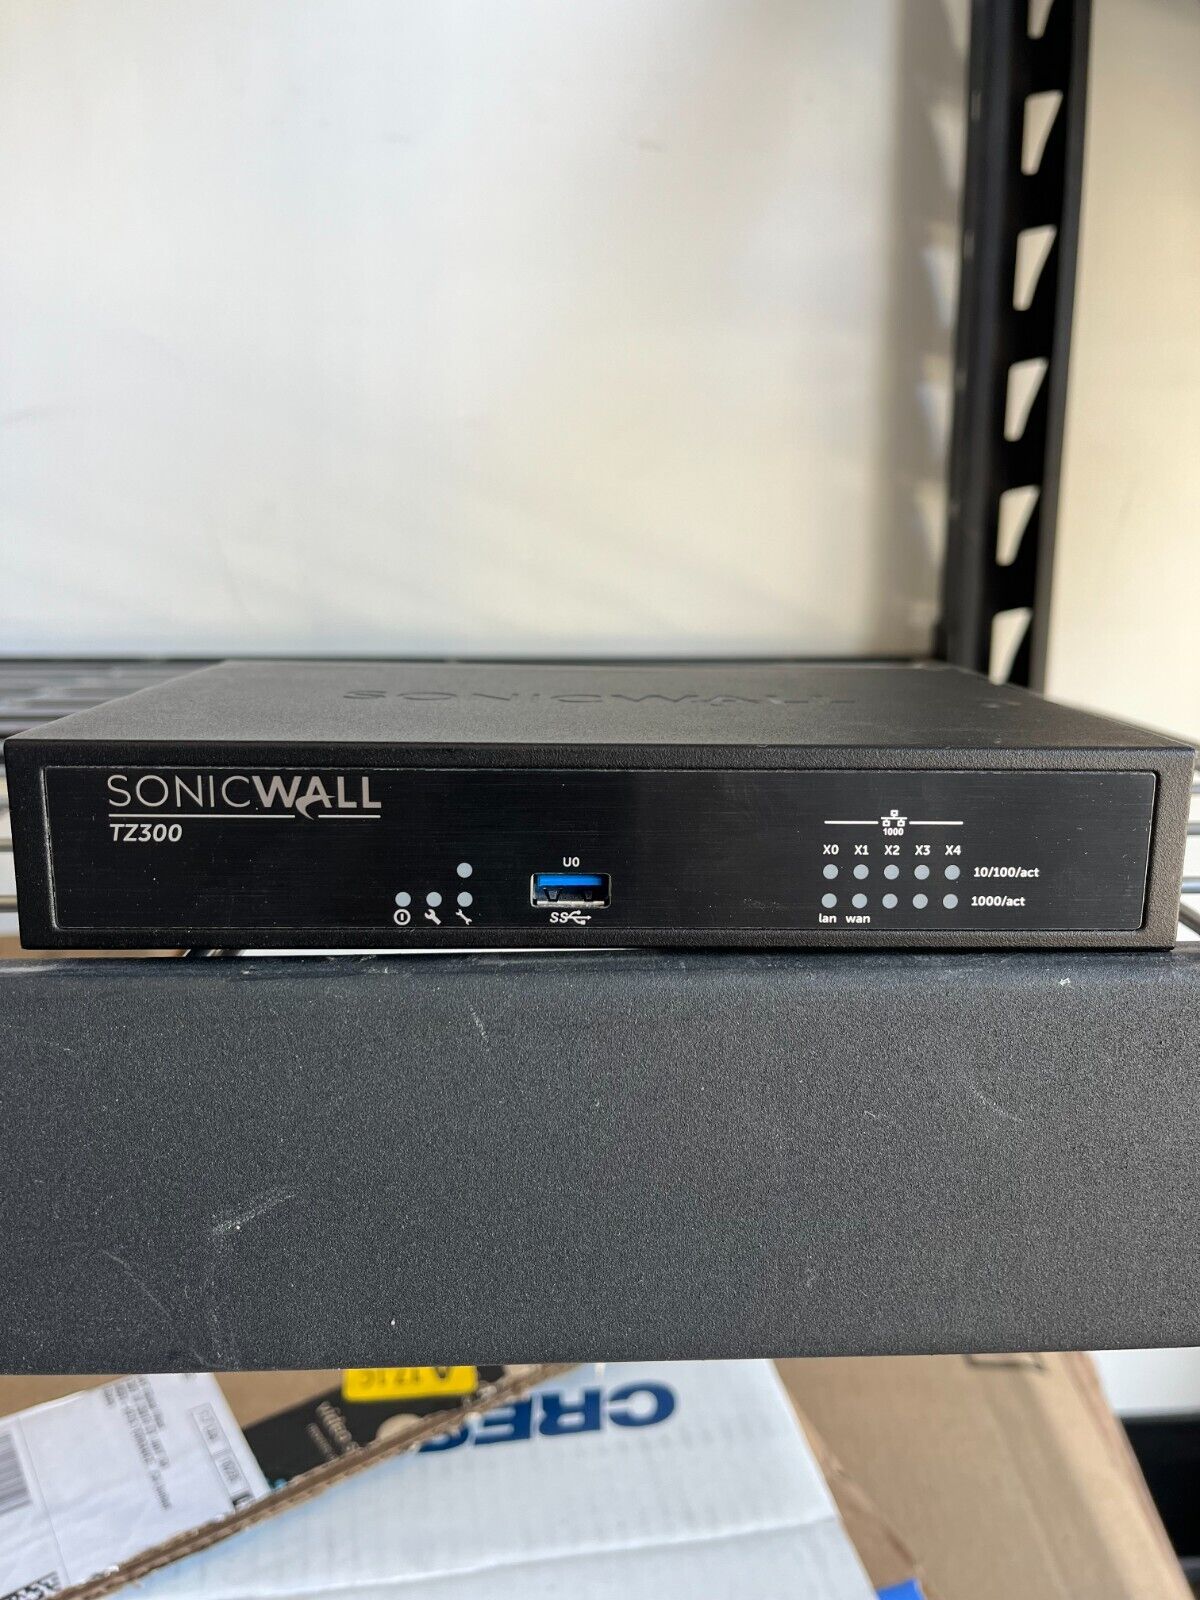 SonicWall TZ300 Power Supply Wired Firewall Router Network Security Appliance 